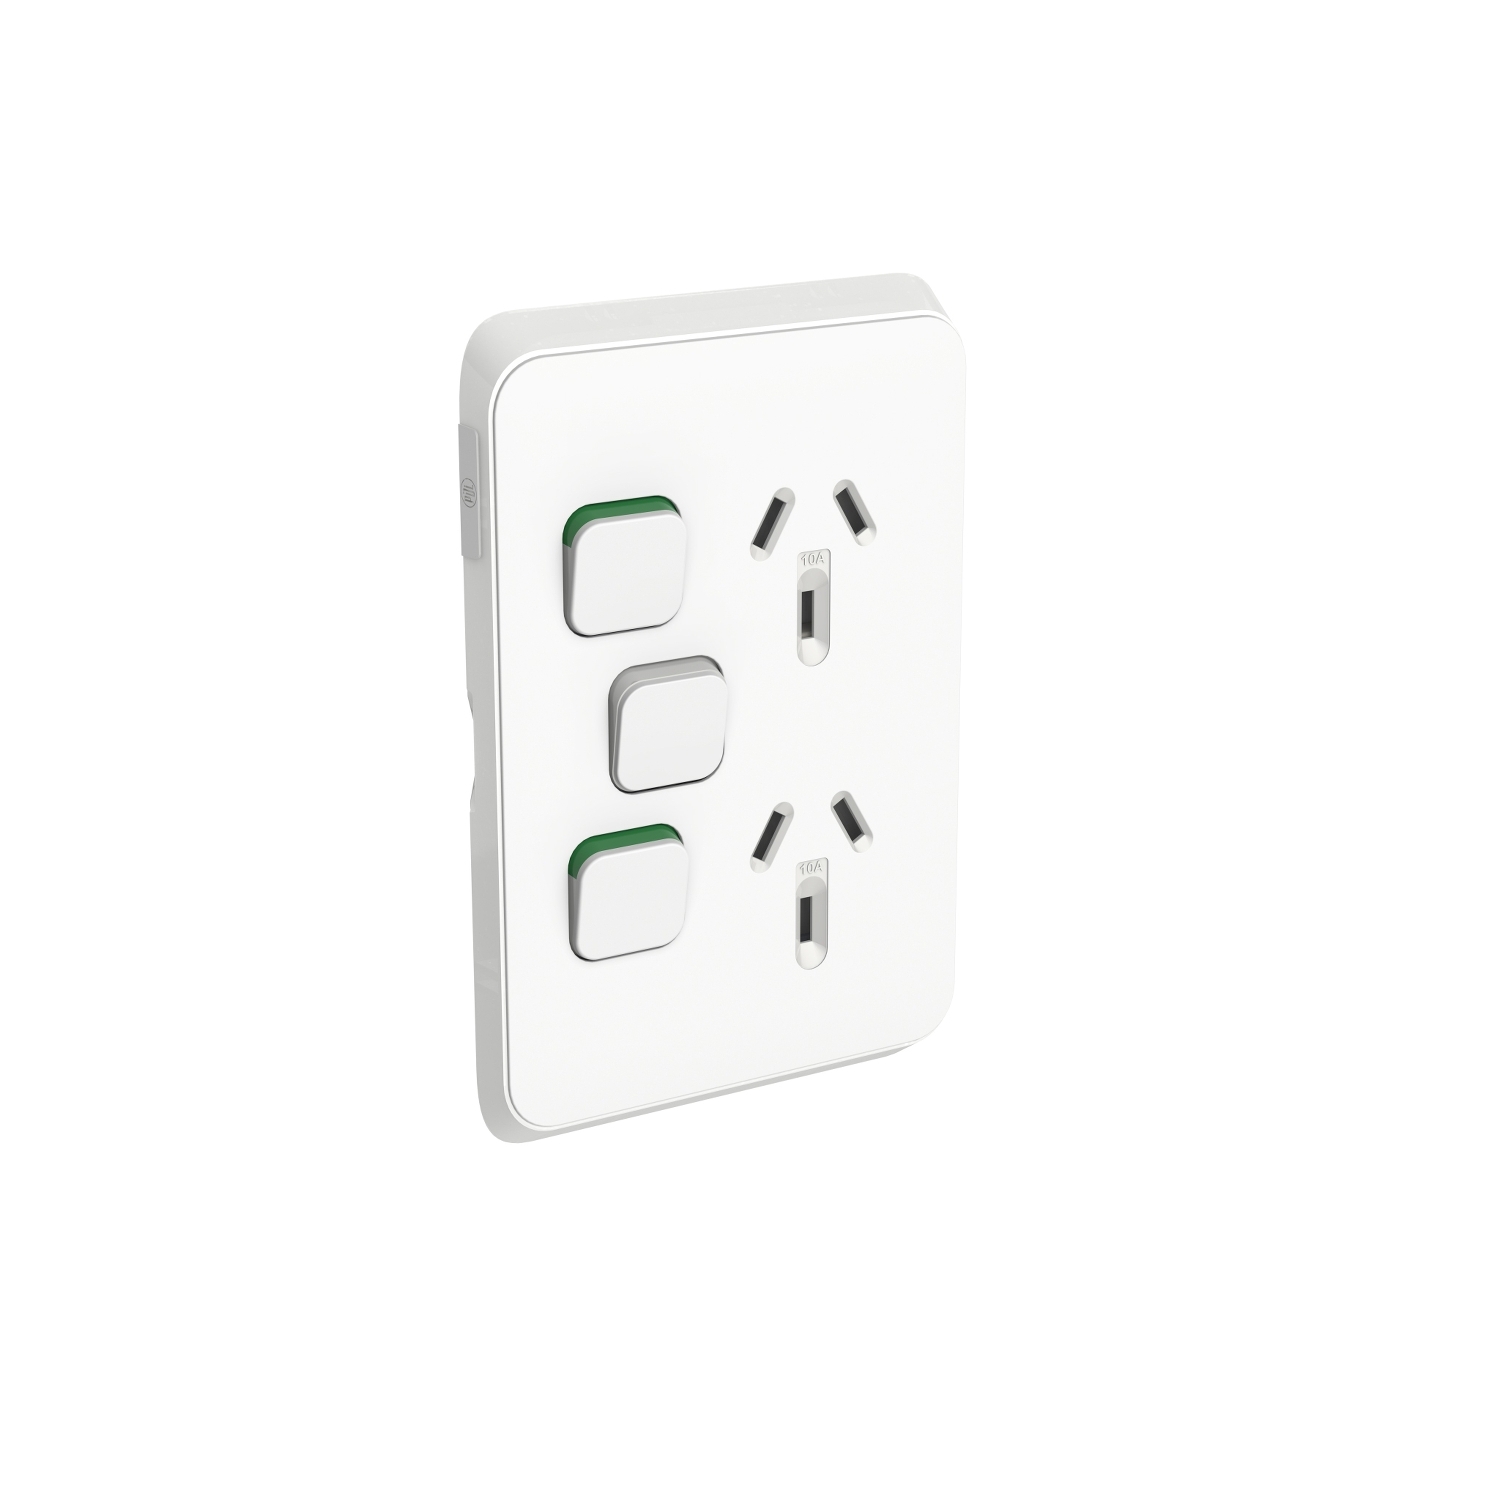 PDL Iconic, switched socket, 3 switch & 2 socket, vert, 10 A, Vivid White